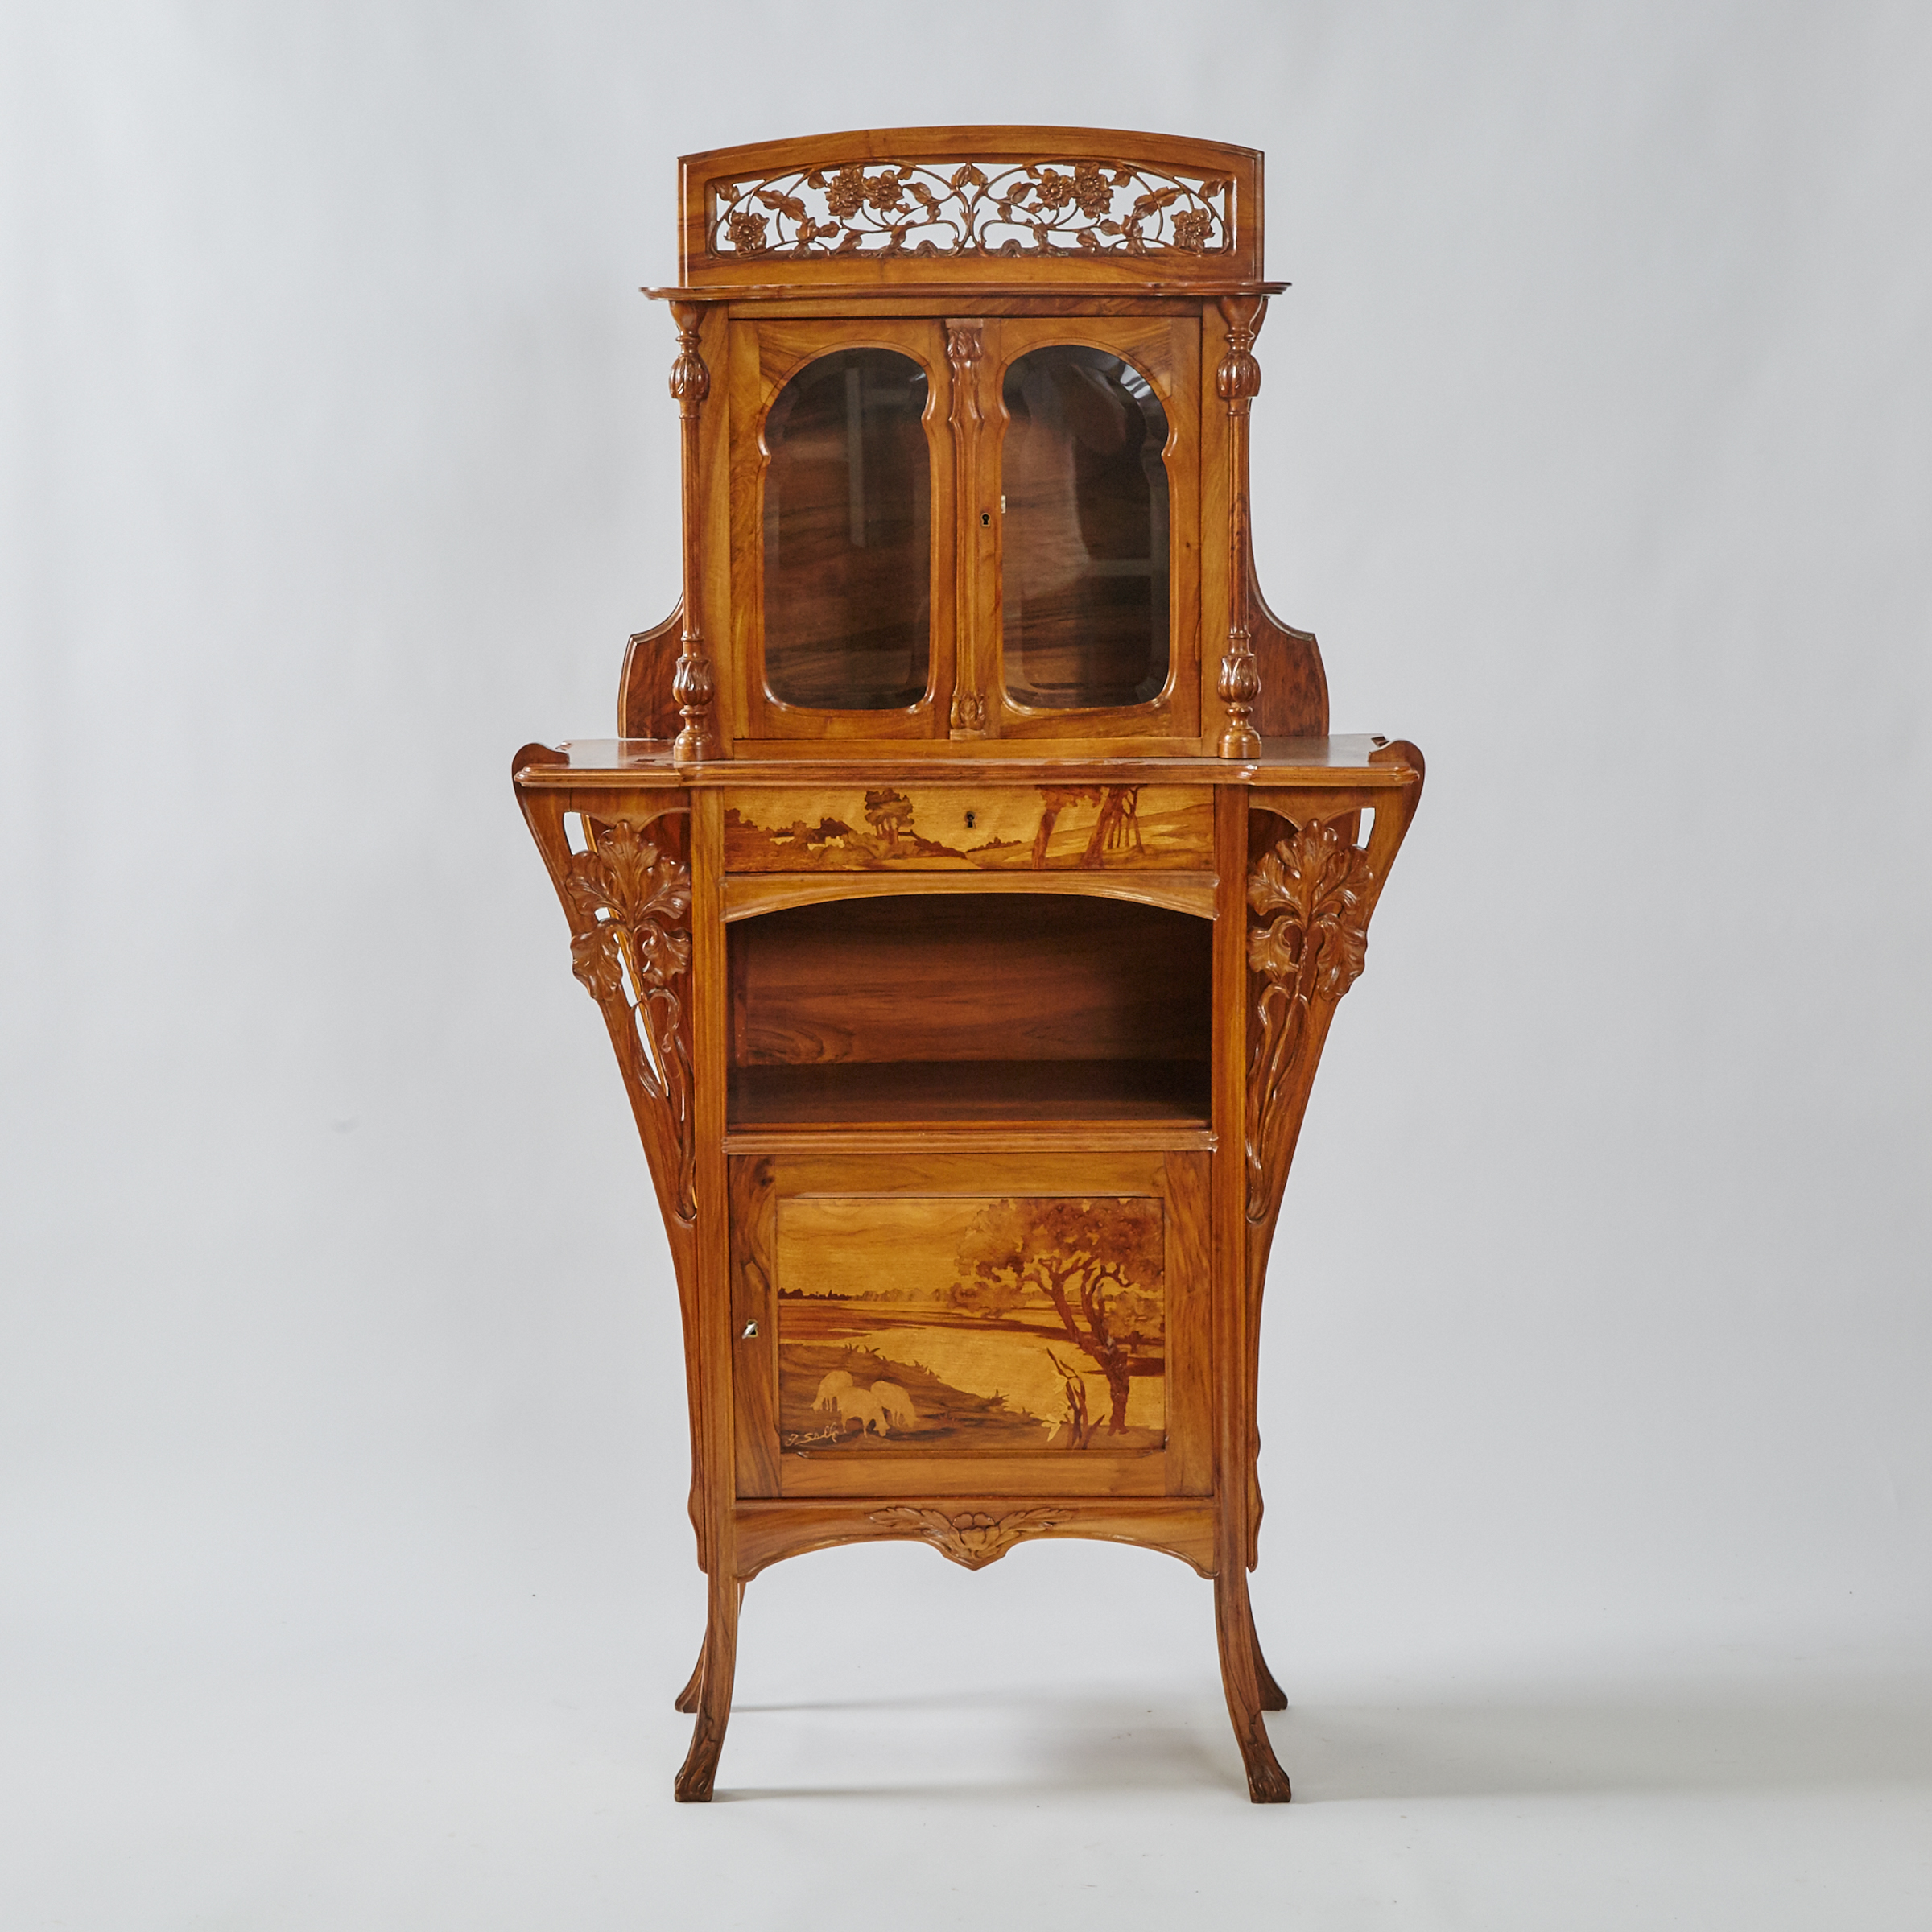 Émile Gallé French Art Nouveau Walnut and Fruitwood Marquetry Inlaid Étagère, 19th/early 20th century